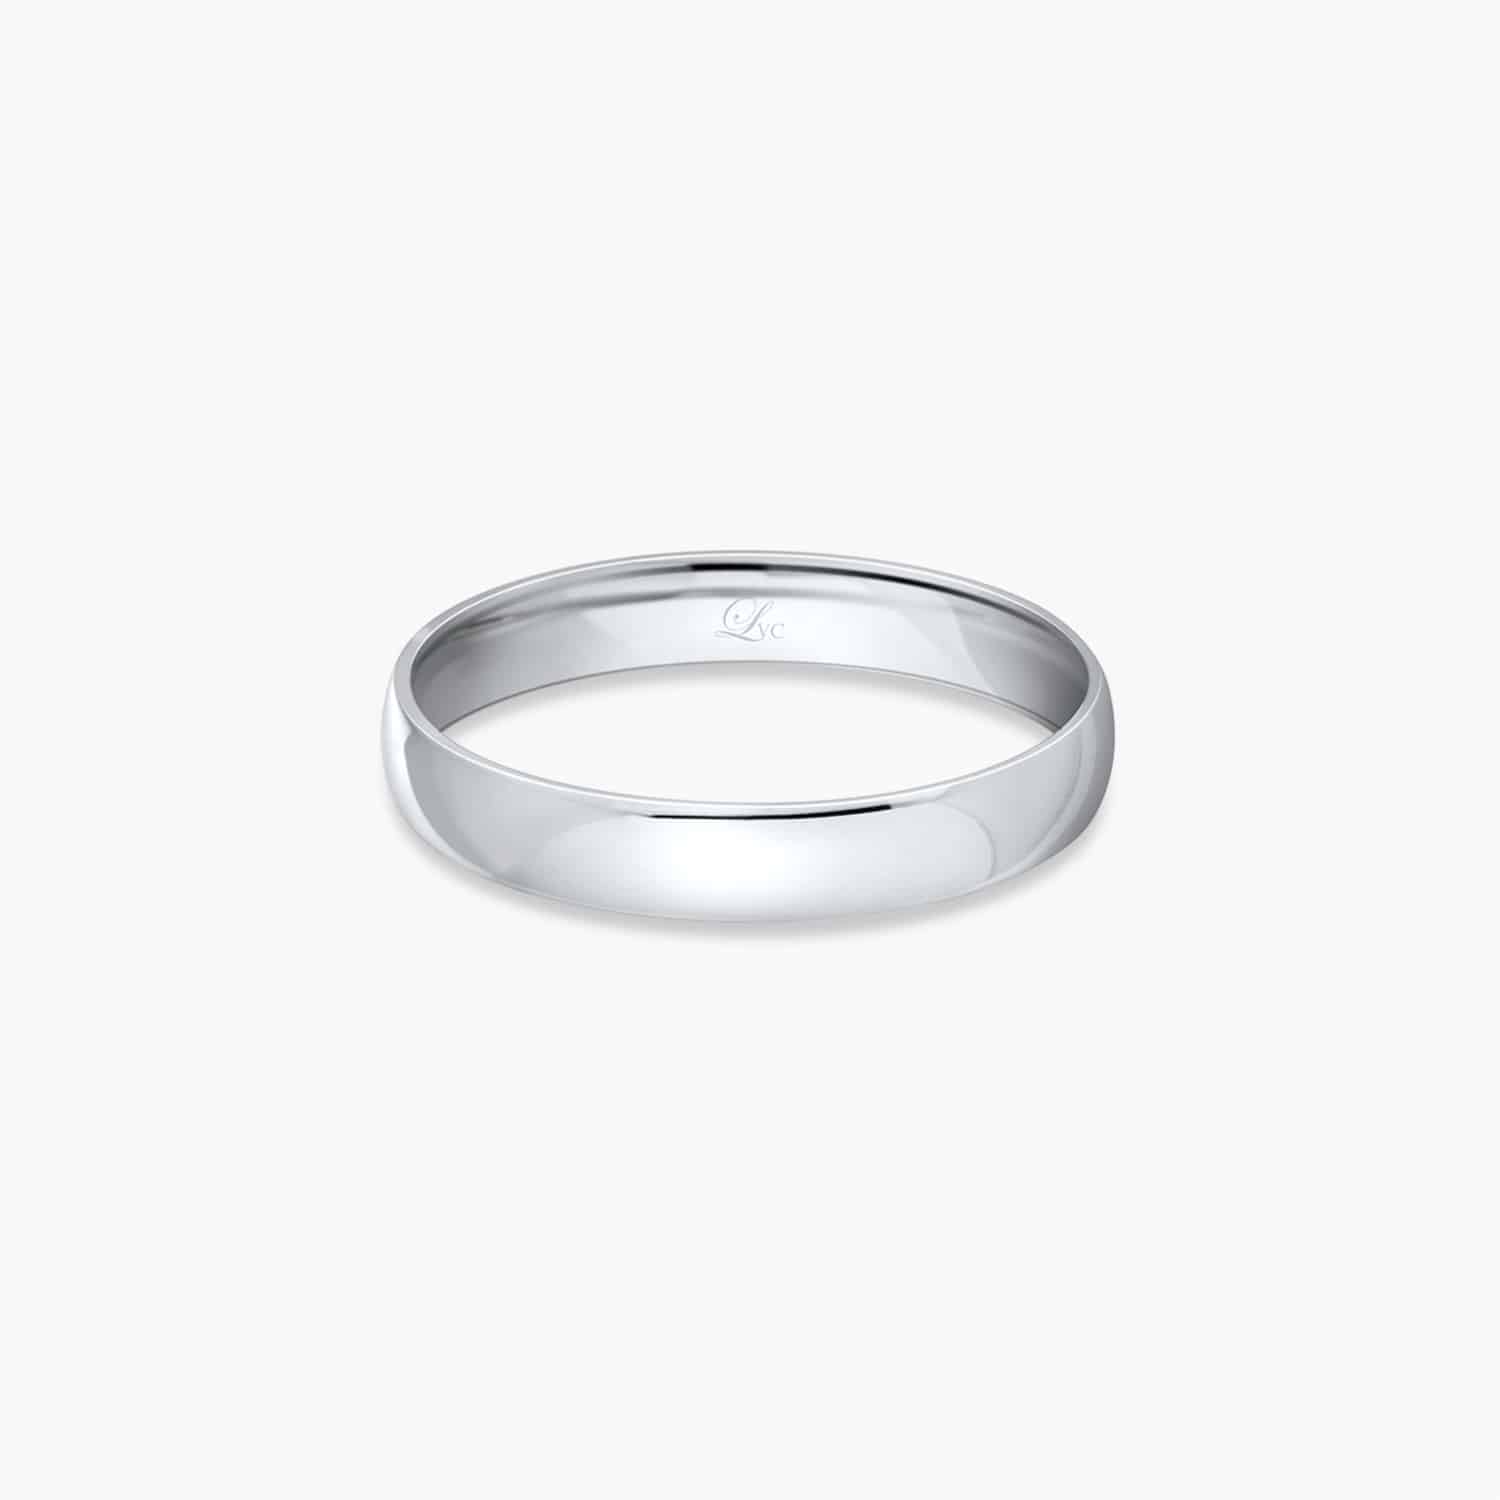 LVC CLASSIQUE WEDDING BAND IN WHITE GOLD a white gold engagement wedding ring or wedding band for men in white gold